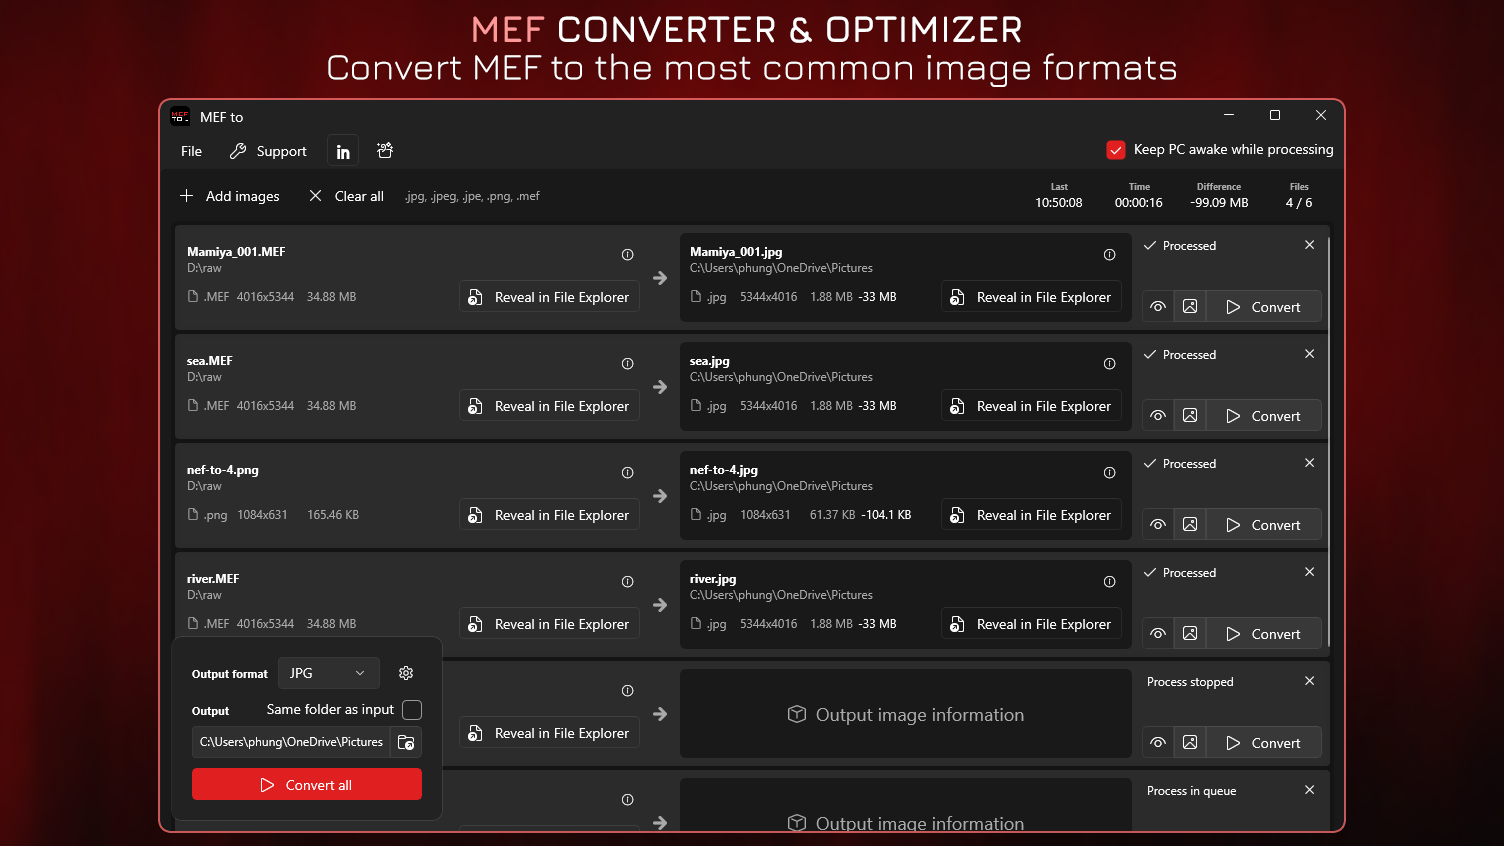 MEF Converter & Optimizer - Convert MEF to JPG and the most common image formats